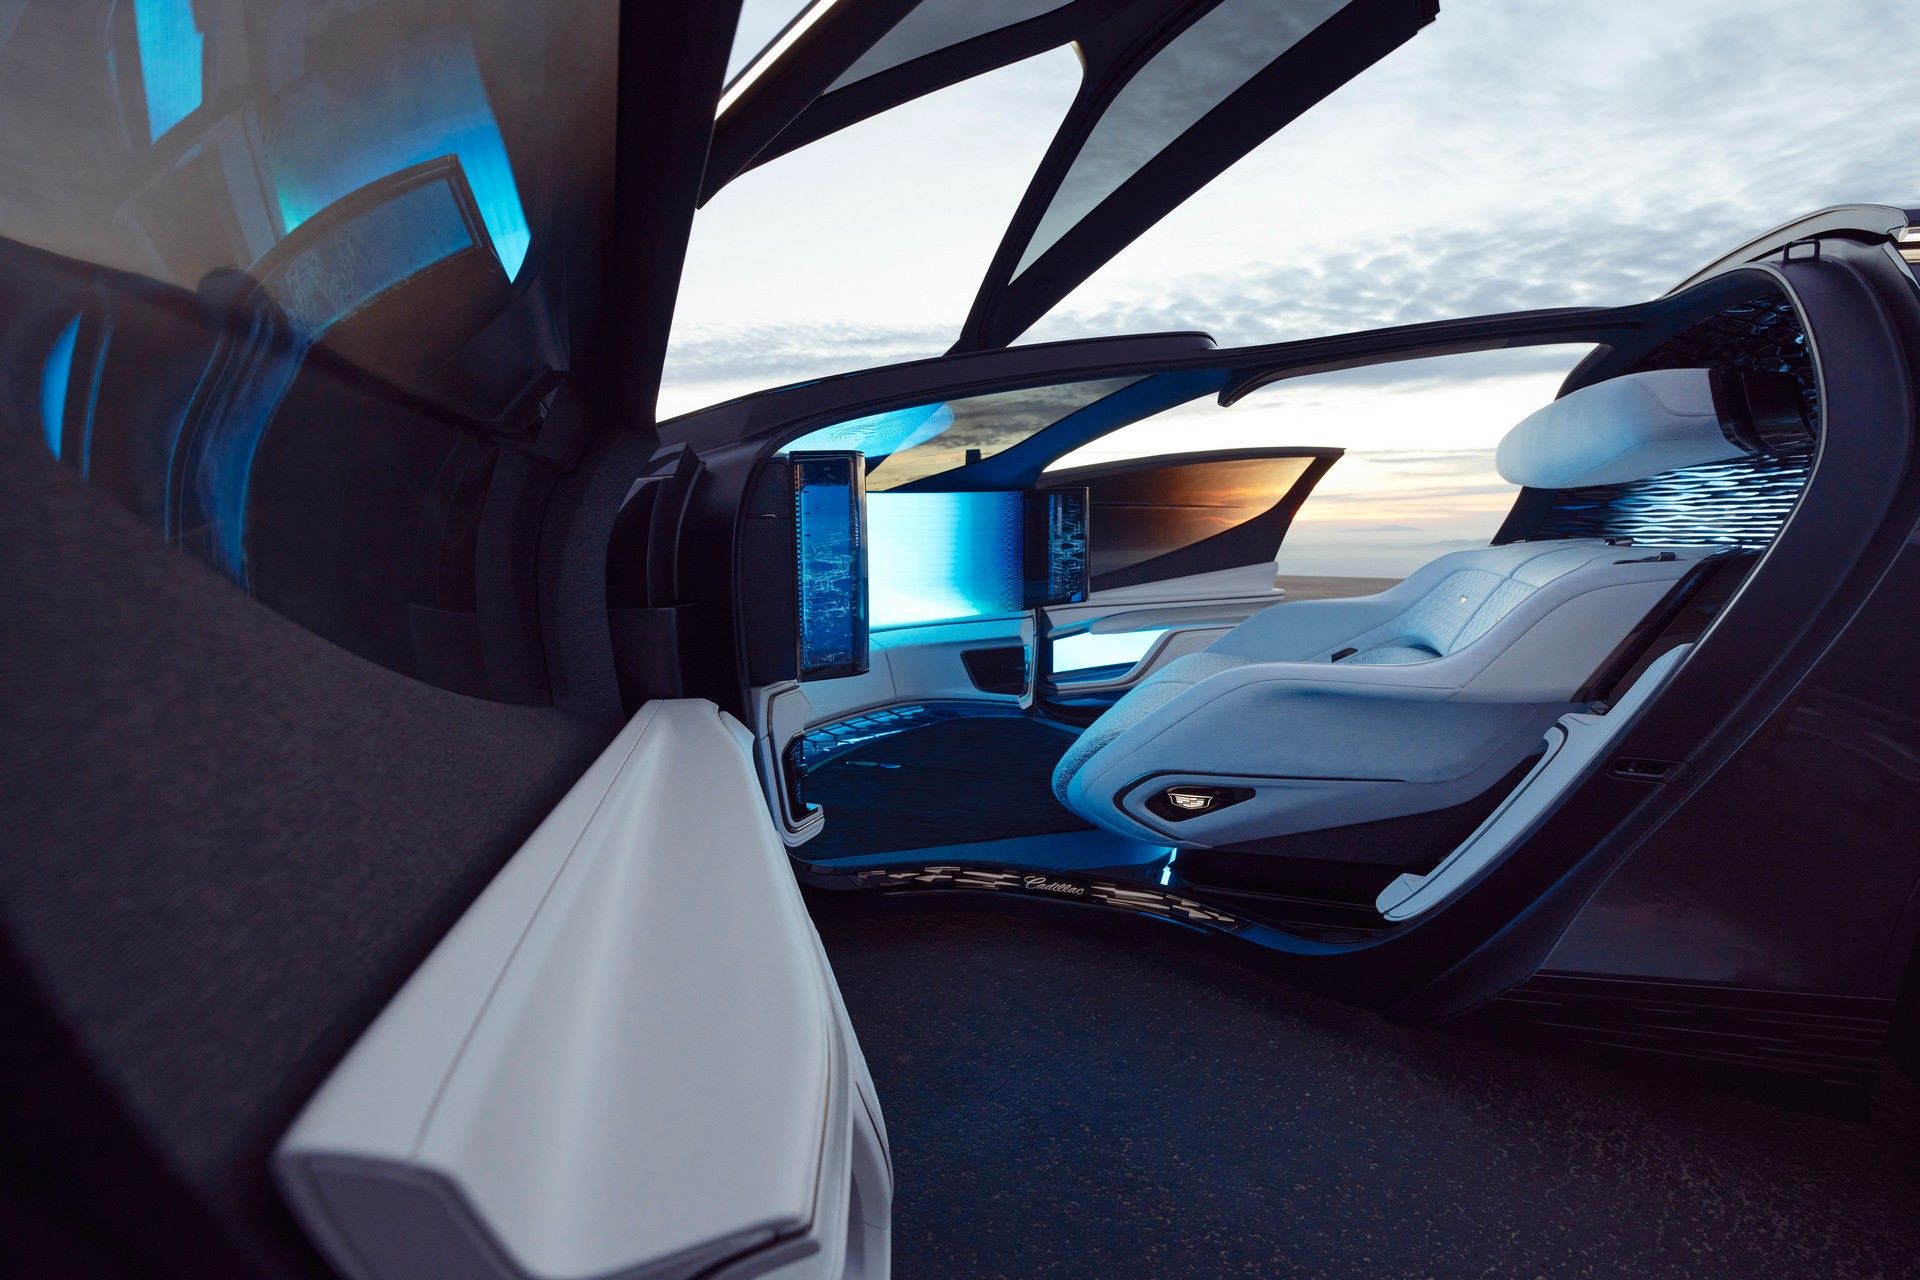 Cadillac-InnerSpace-Concept-20